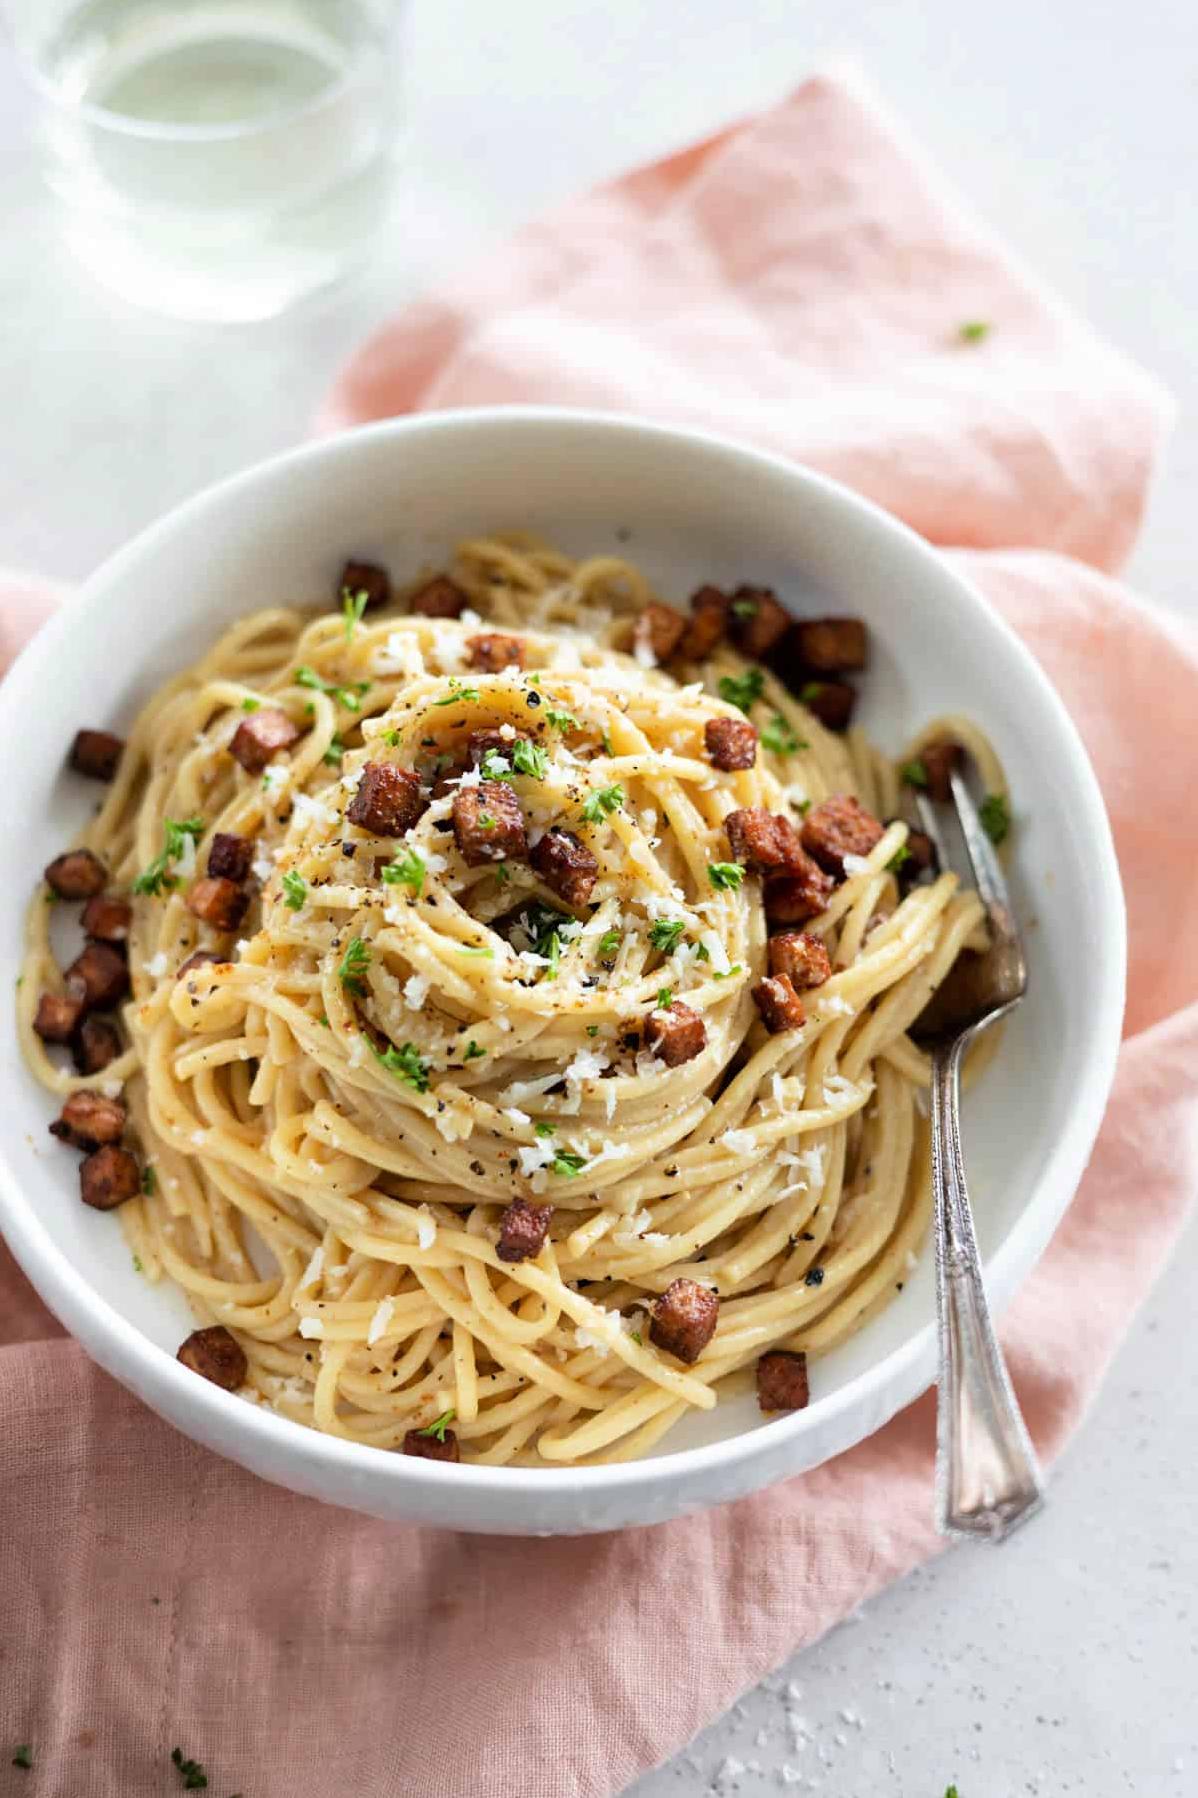  Creamy and delicious, this carbonara is completely free of animal products.